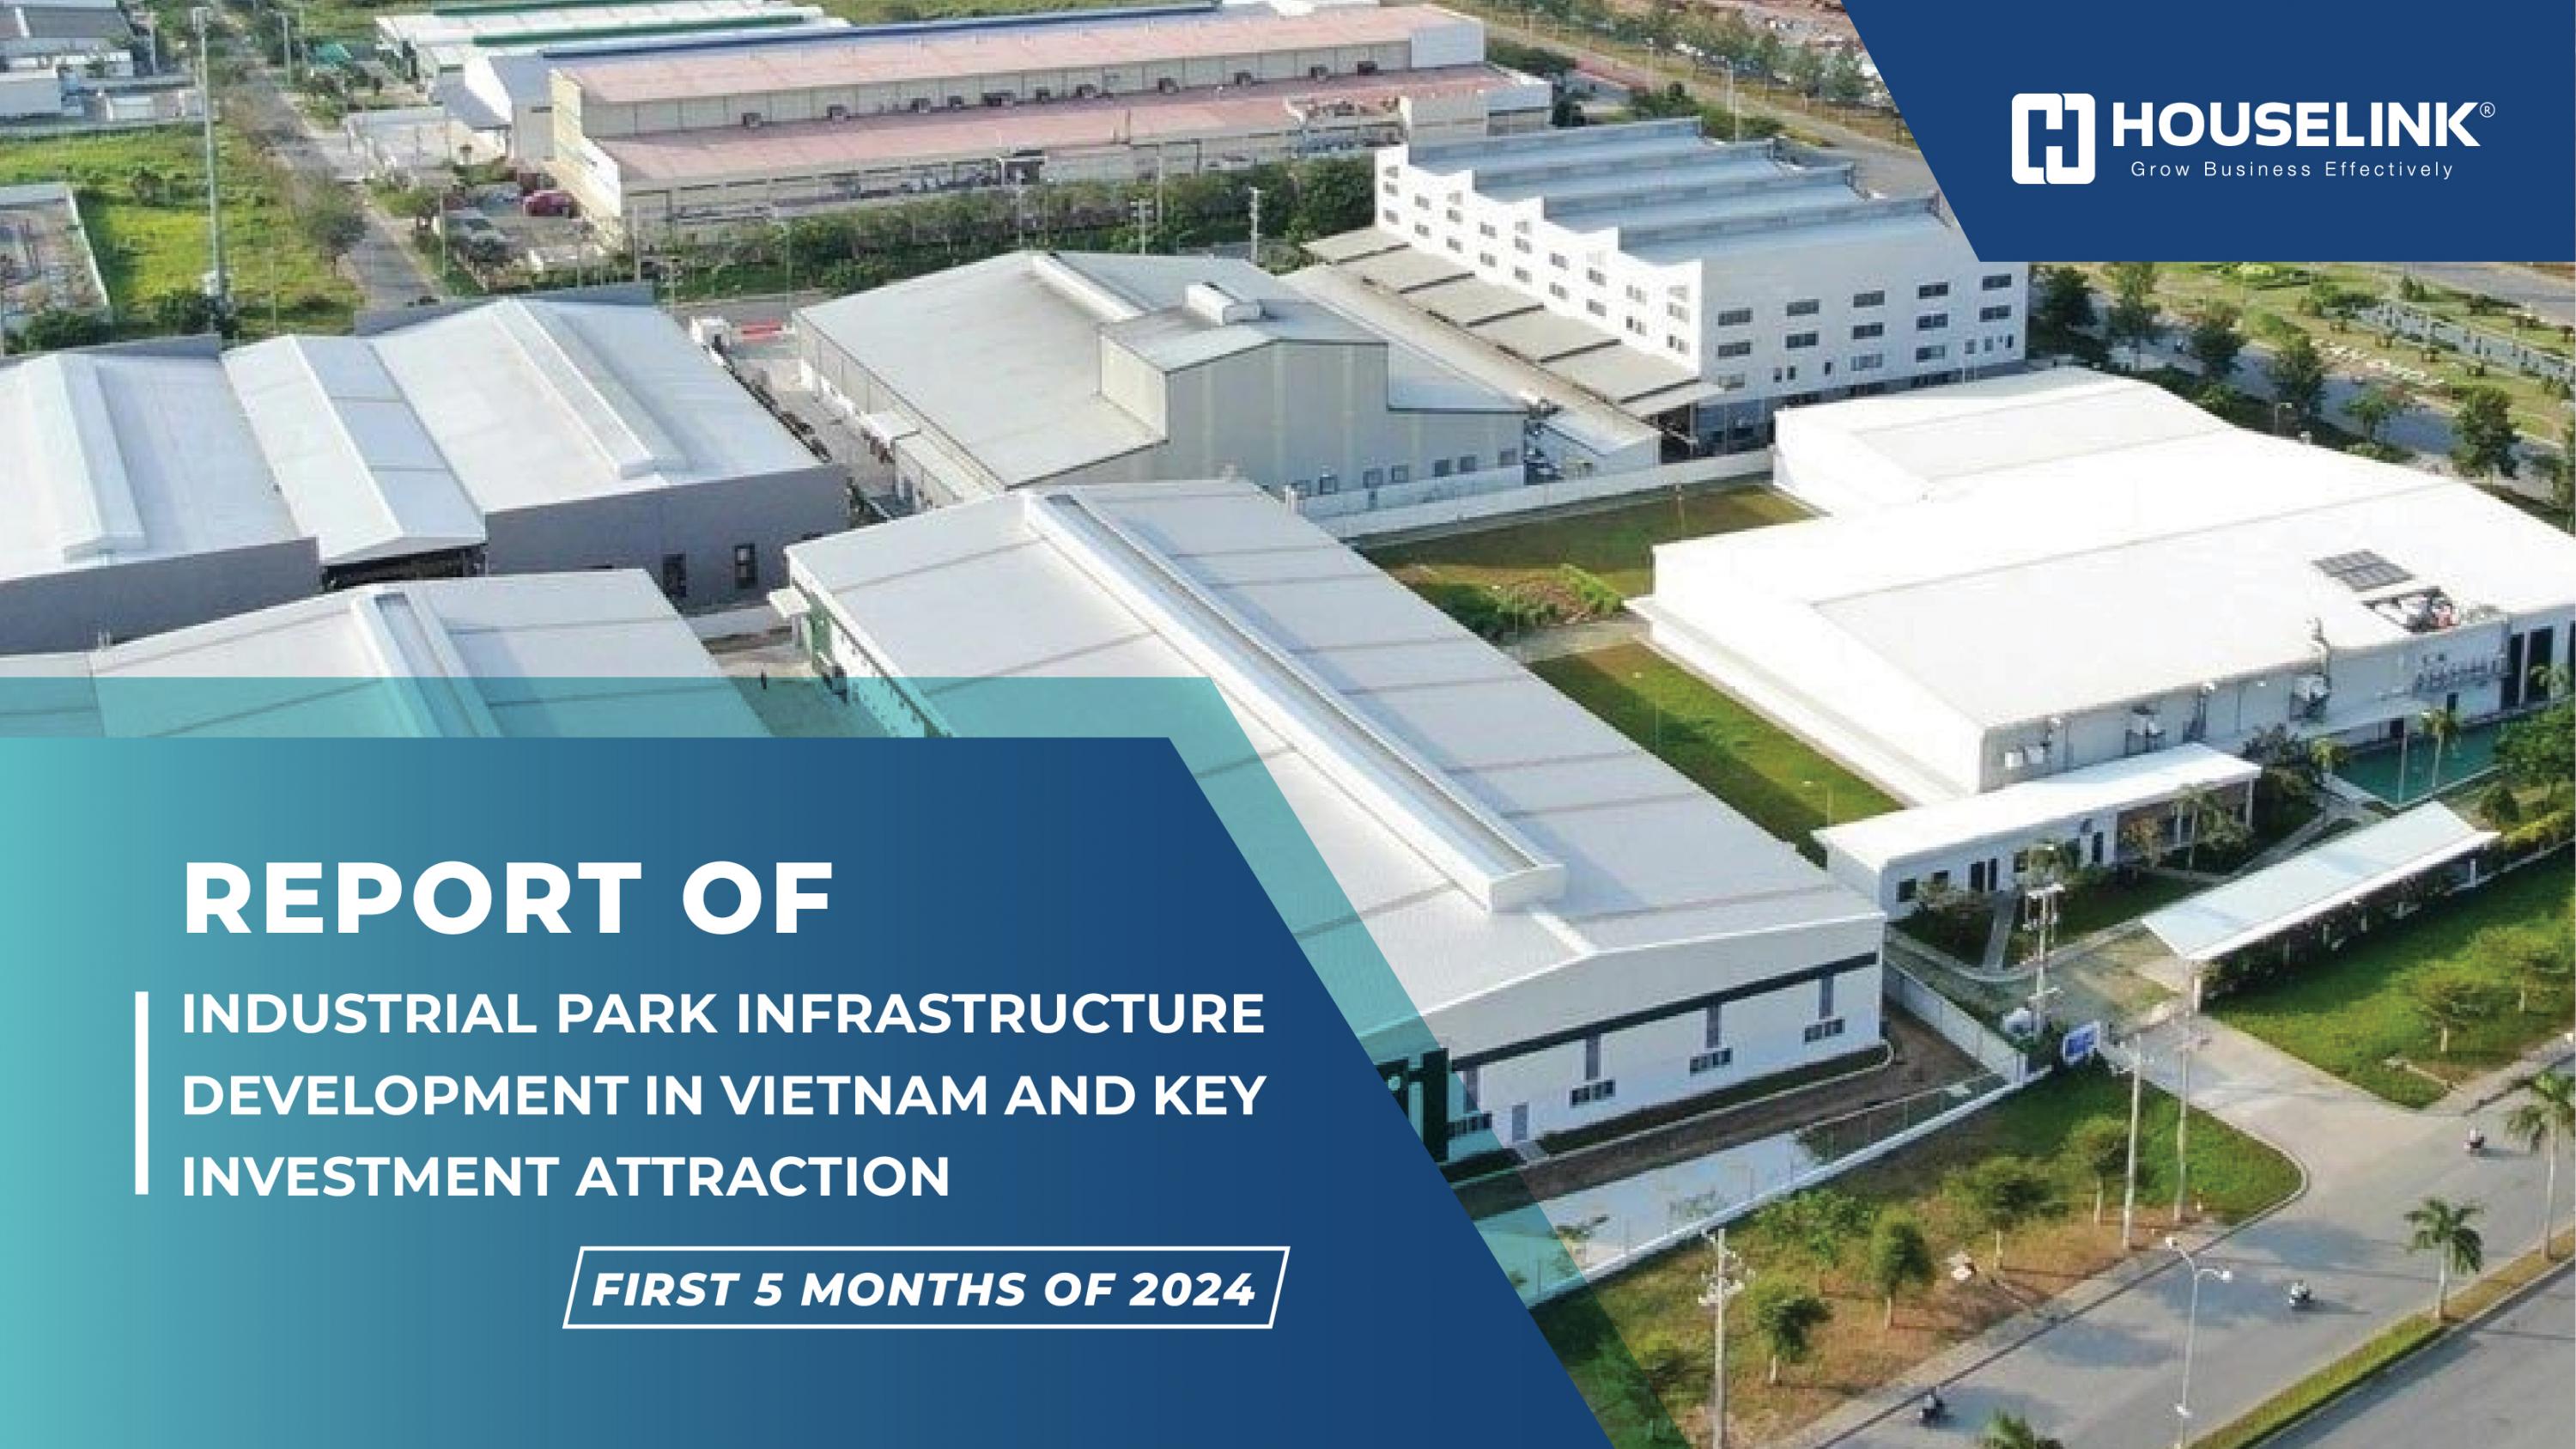 Report Of Industrial Park Infrastructure Development In Vietnam And Key Investment Attraction – First 5 Months Of 2024